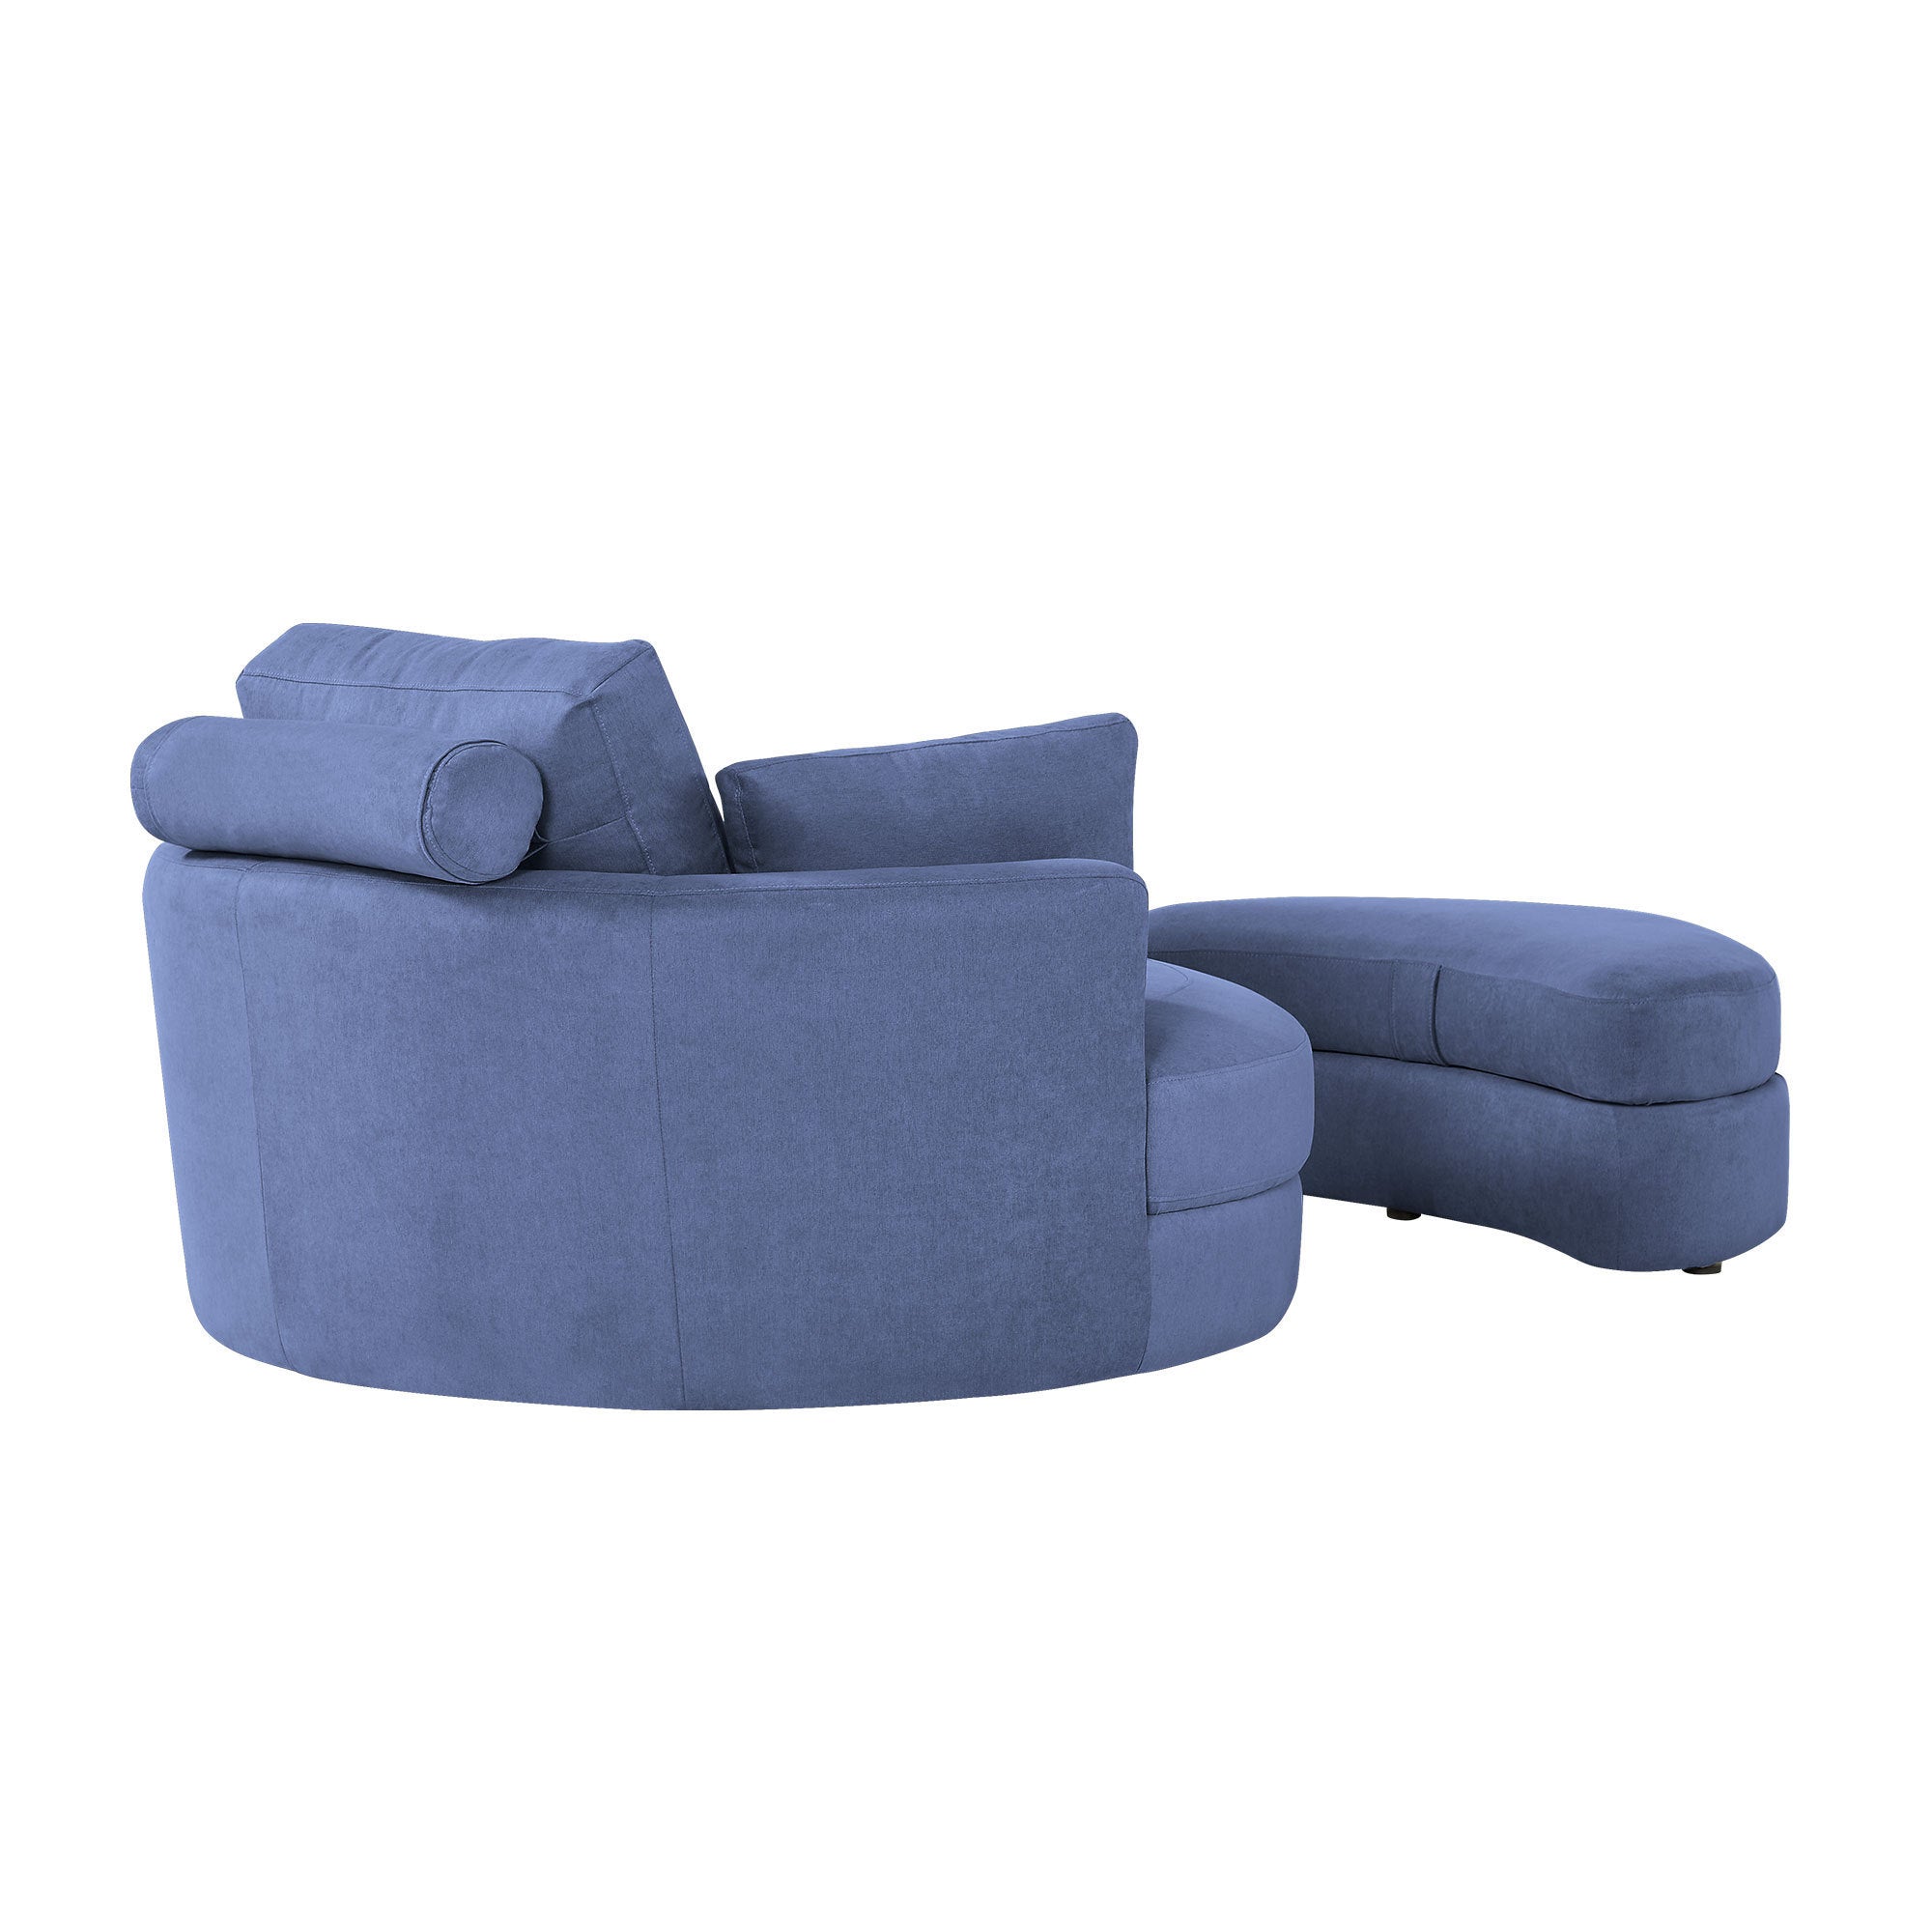 WelLinen Fabric Swivel Accent Barrel Big Round Lounge Sofa Chair with Storage Ottoman and Pillows (Blue)